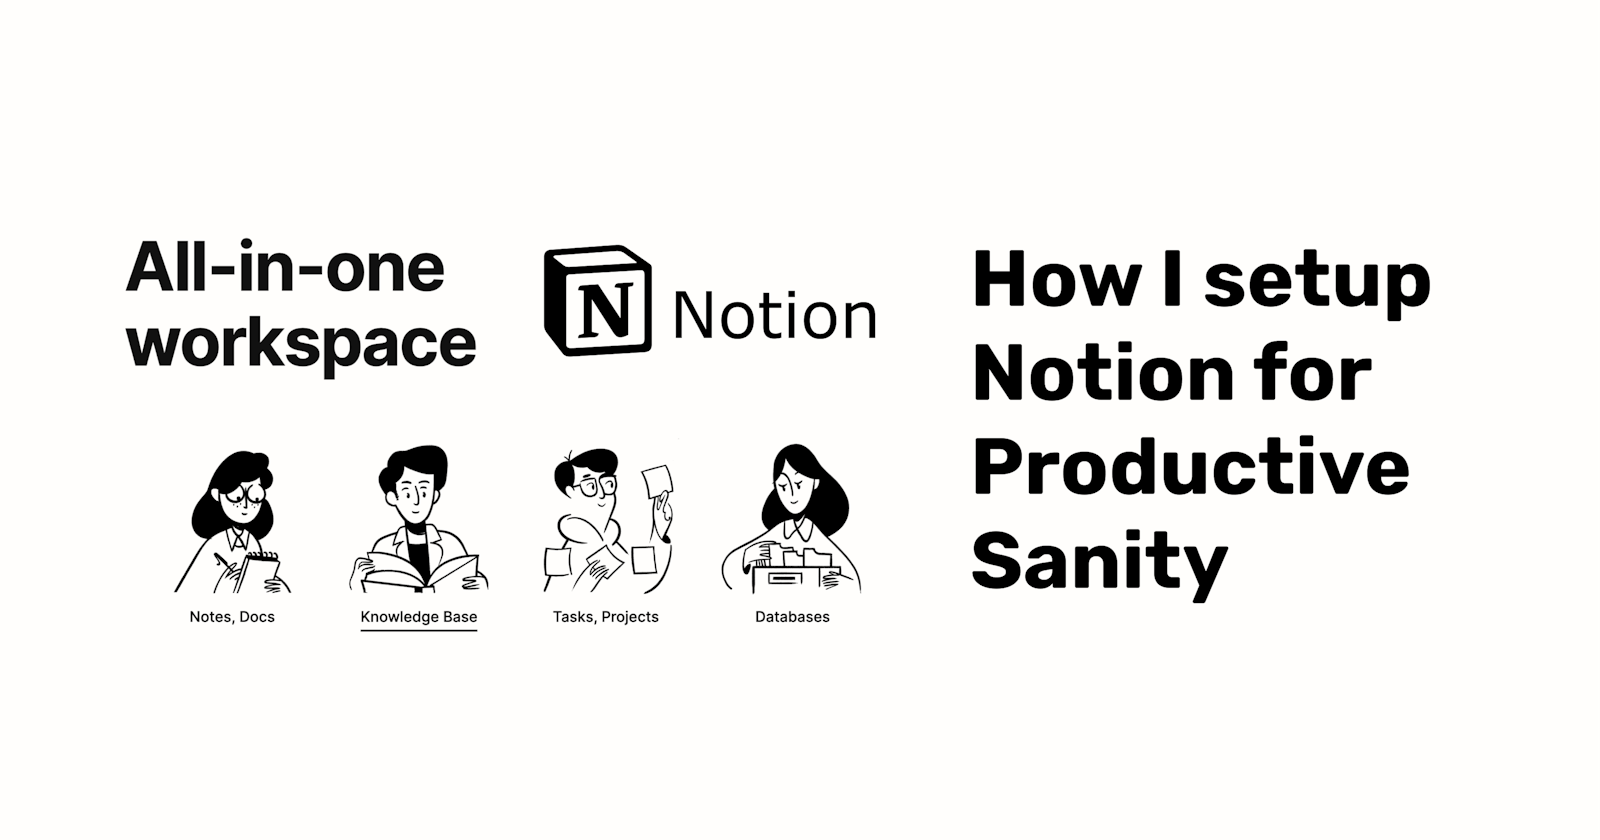 How I set up Notion for Productive Sanity